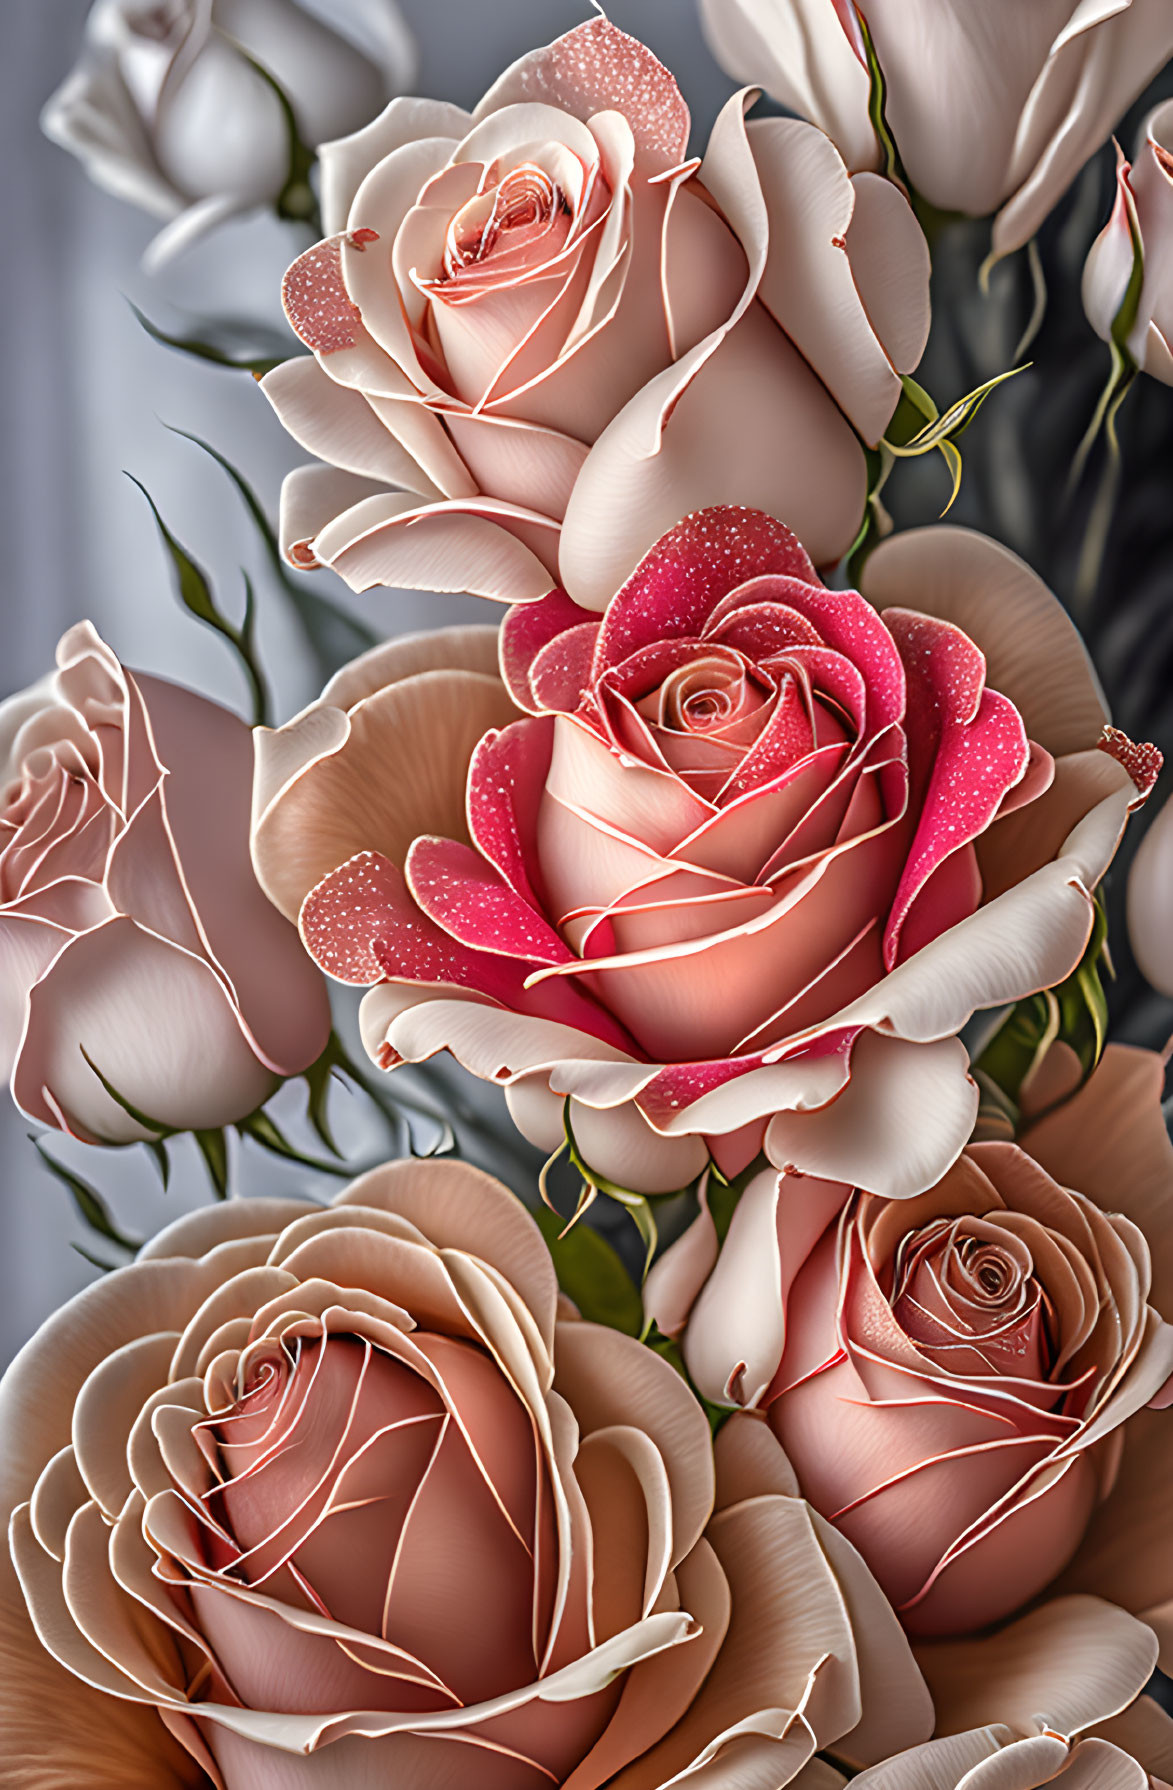 Detailed Close-Up of Delicate Pink Roses with Water Droplets